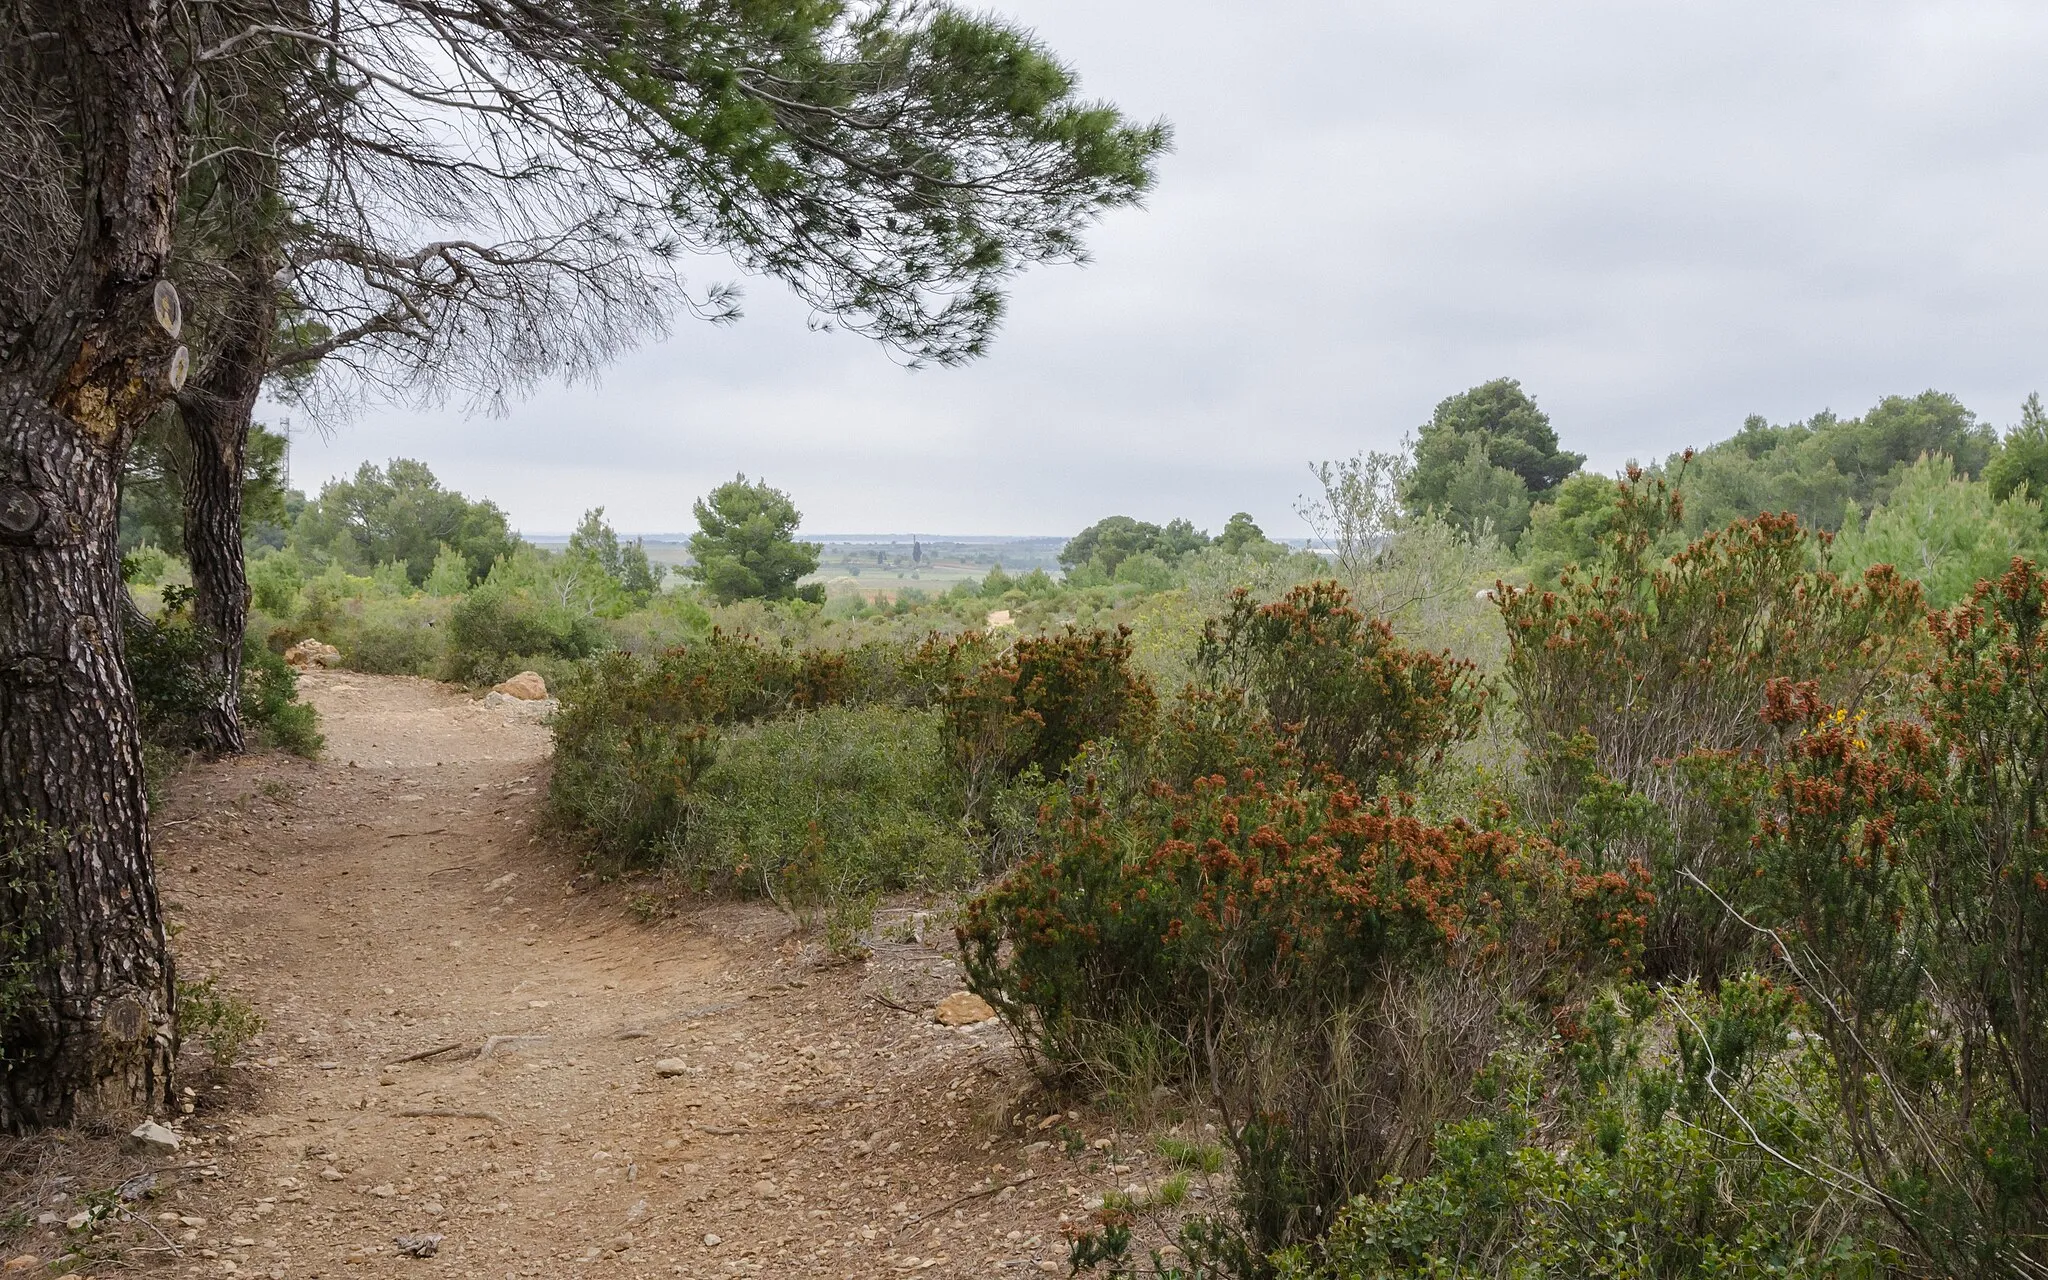 Photo showing: Trail in the commune of Pinet, Hérault, France. Aspect ratio 16:10.